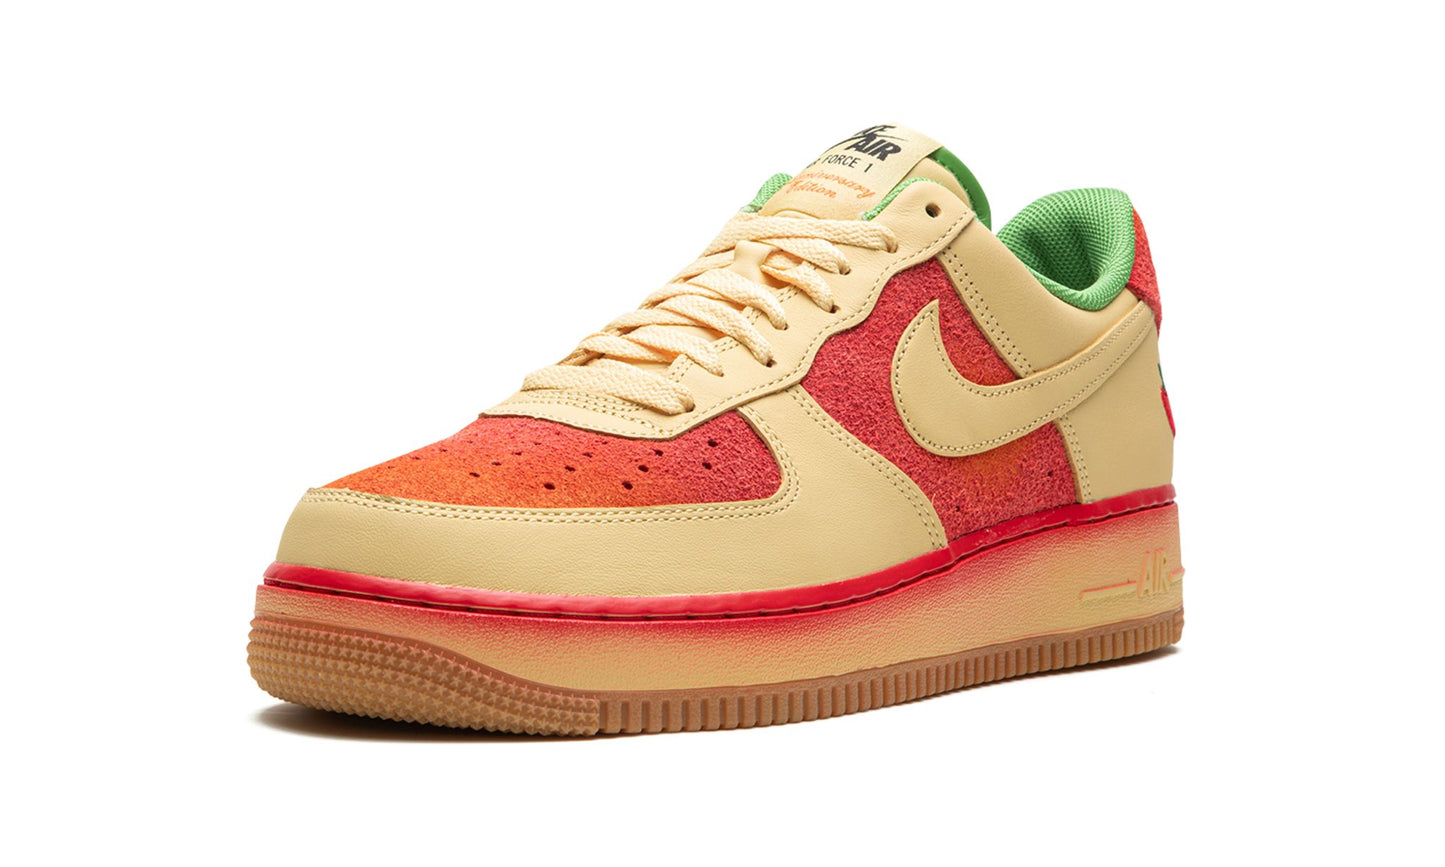 Nike Air Force 1 Low Chilli Pepper